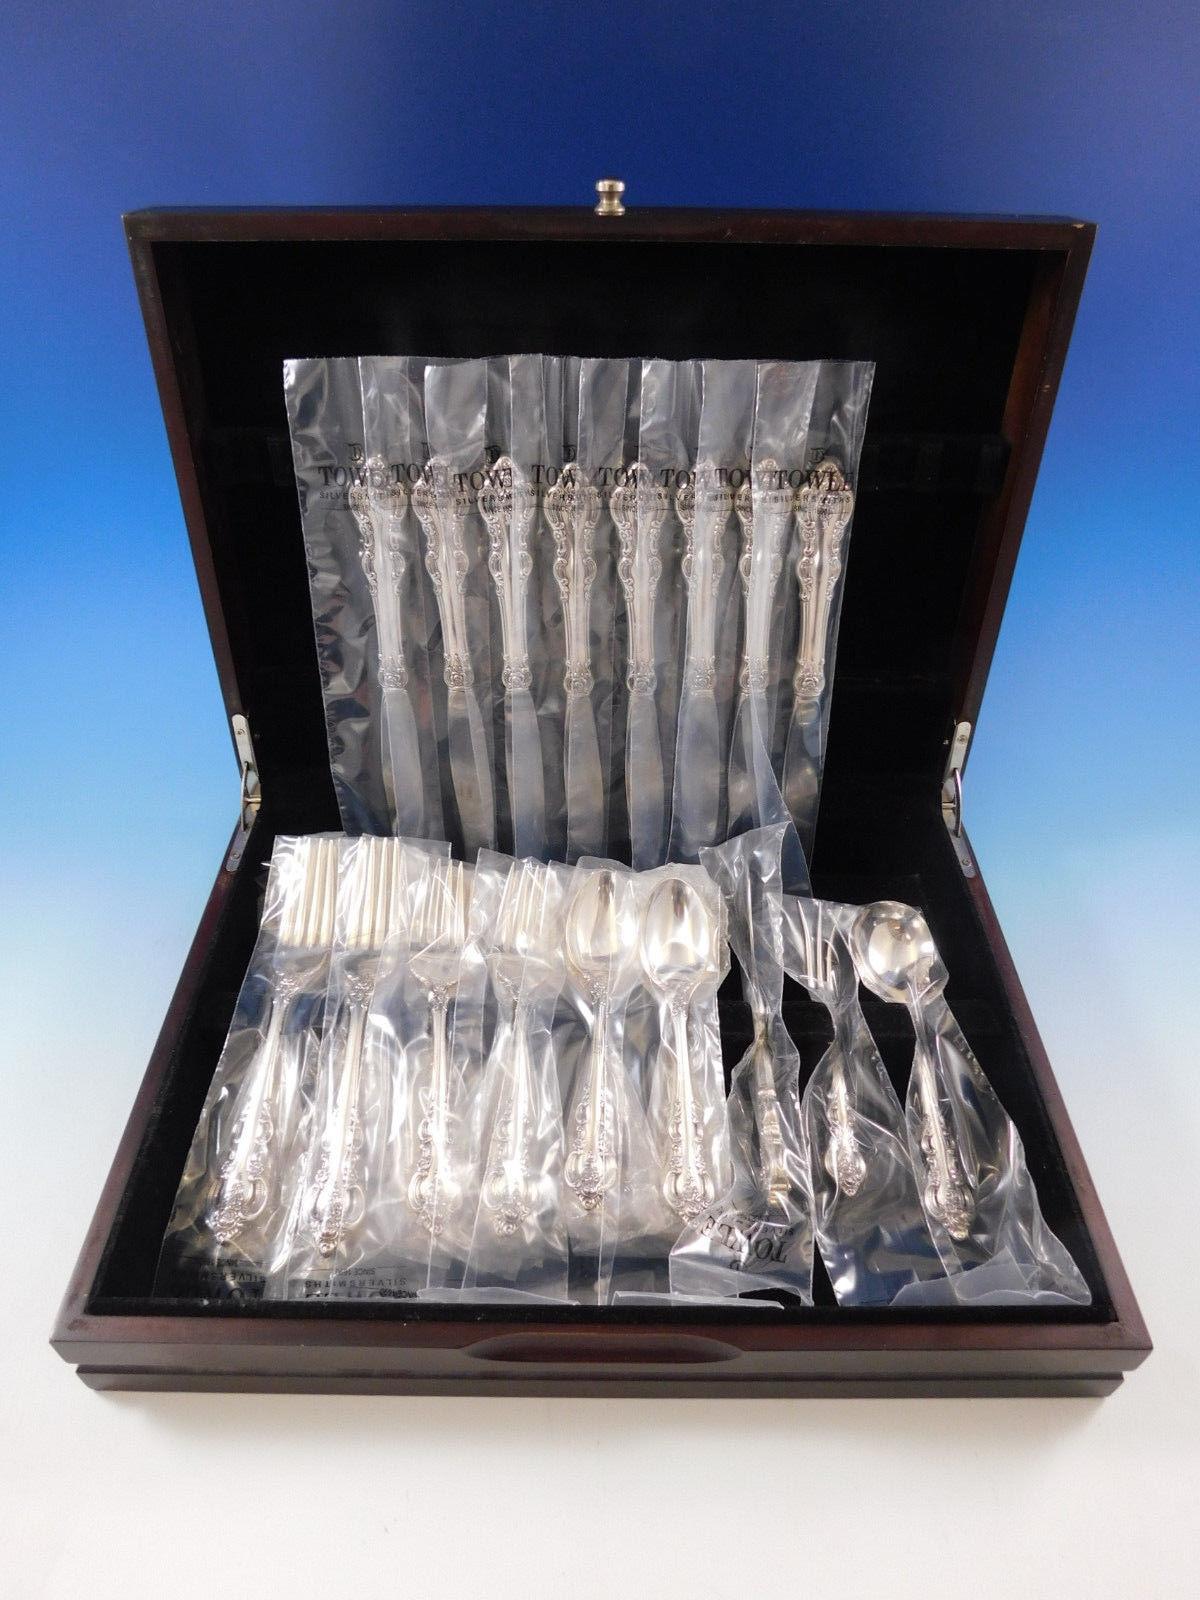 Lavish, handcrafted detailing graces the stem and handle of this pattern. El Grandee is a richly designed, highly sophisticated addition to any formal setting.

New in factory sleeves El Grandee by Towle sterling silver flatware set of 35 pieces.